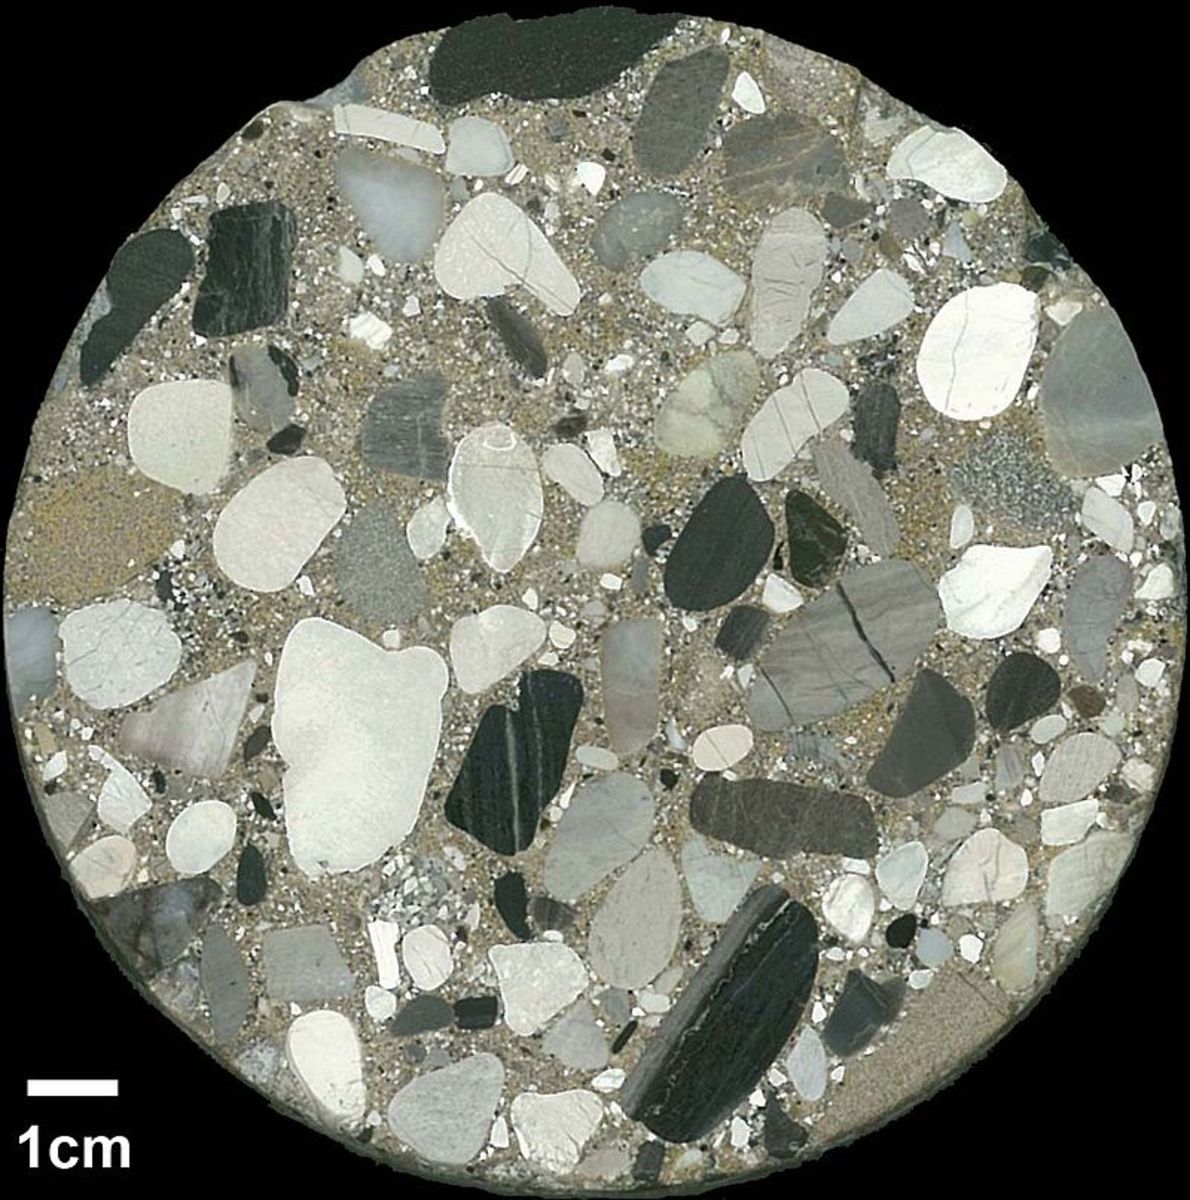 The conglomerate in this core sample has older clasts surrounded by a younger matrix of silt, sand, and clay